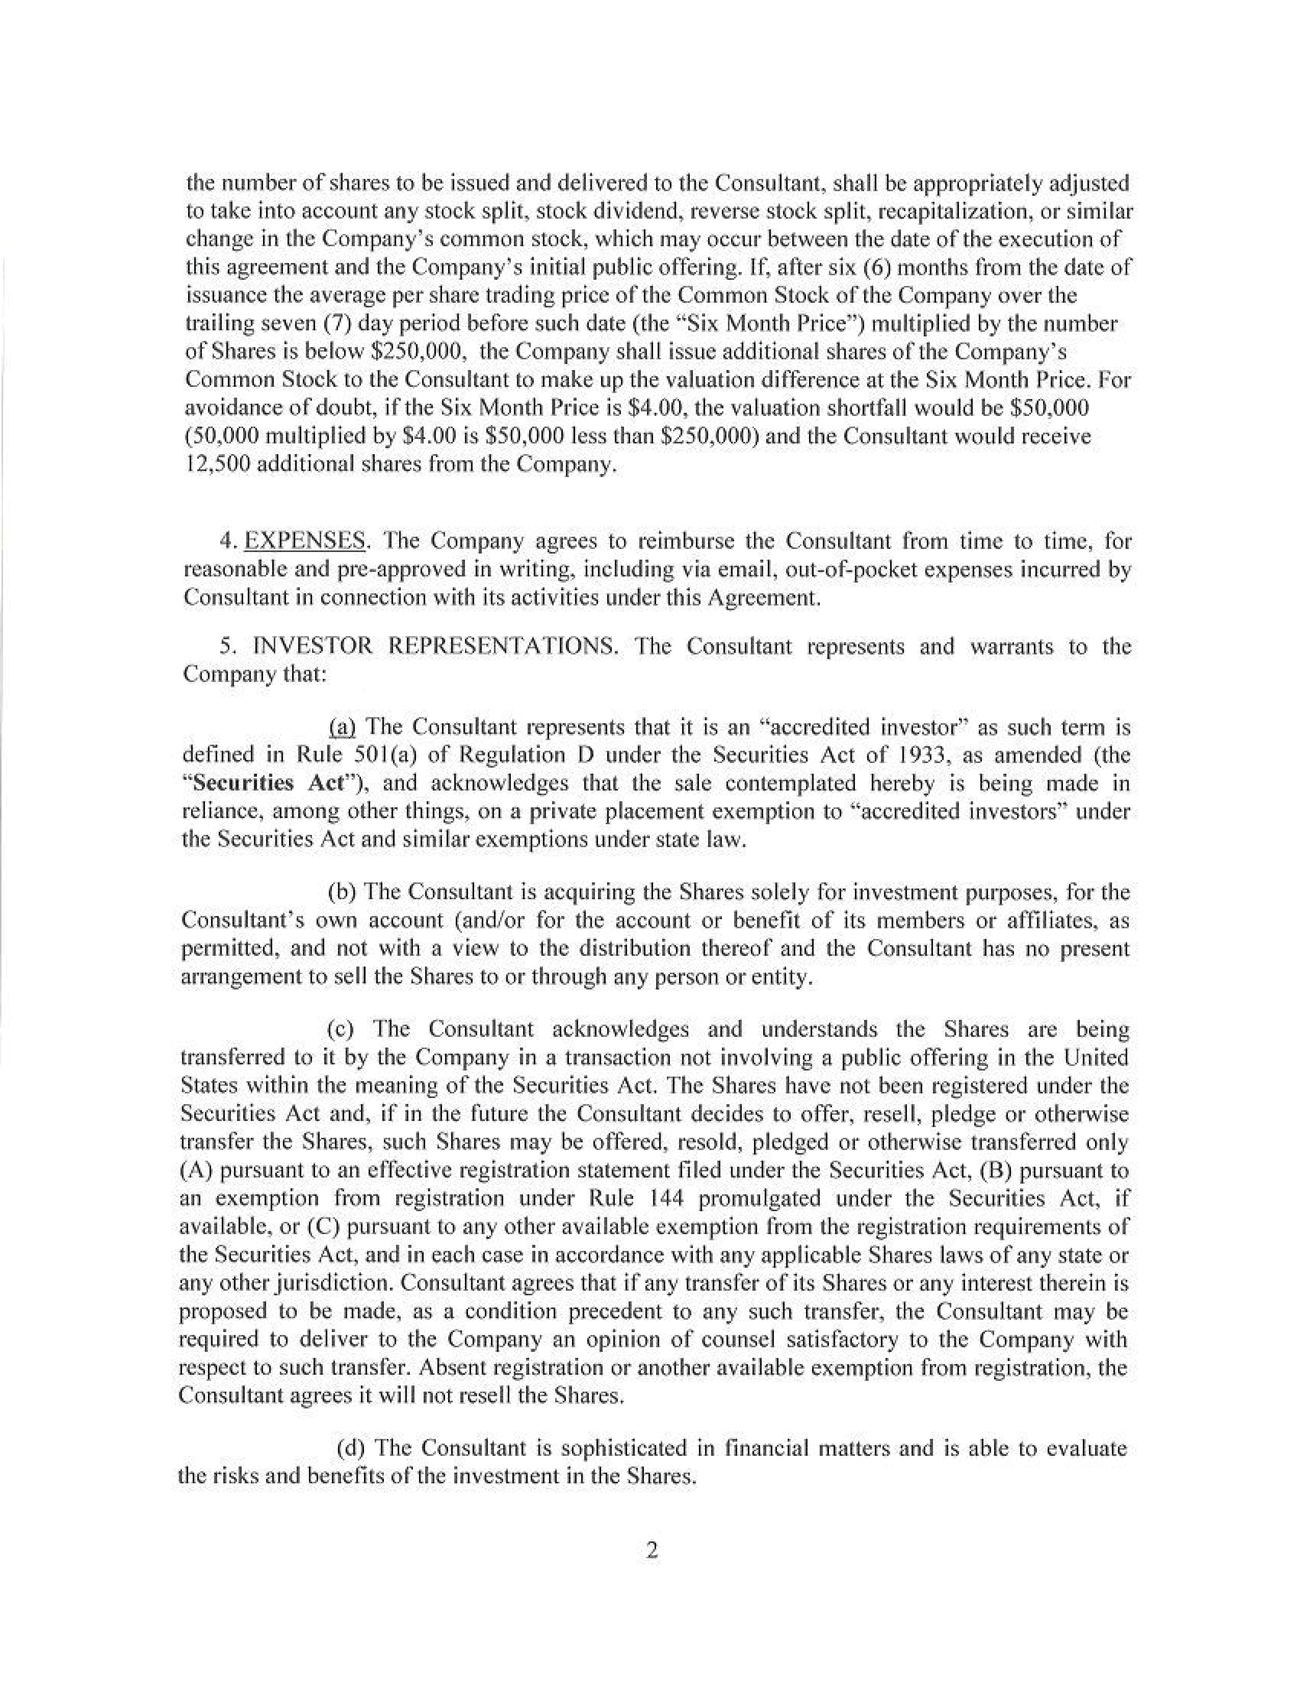 New Microsoft Word Document - Copy (2)_exhibitpage010page030_page002.jpg